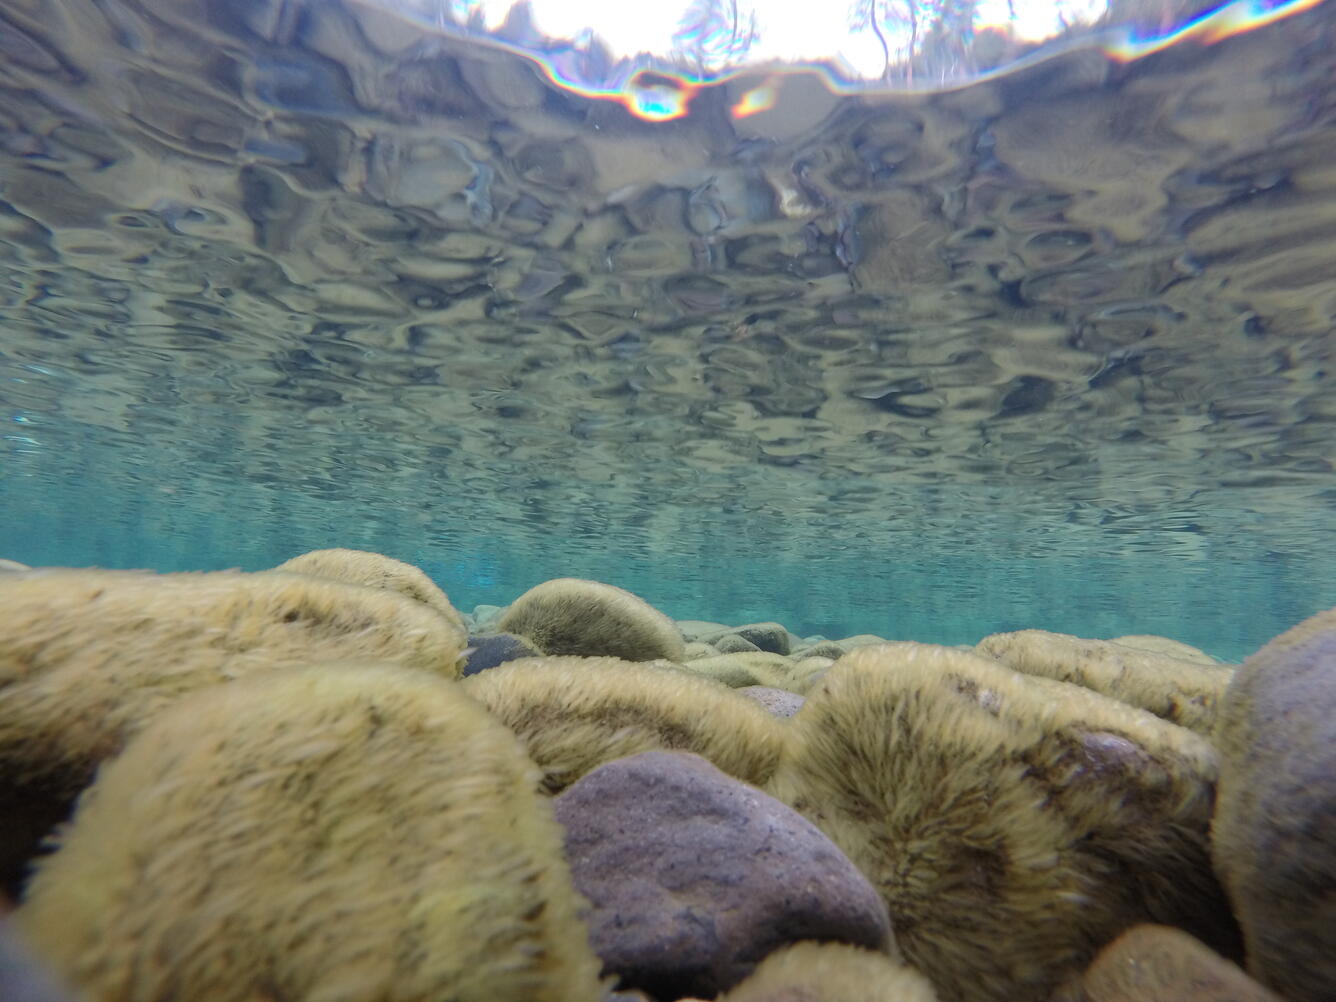 Underwater view of periphyton on rocks and the Lake Tahoe shoreline